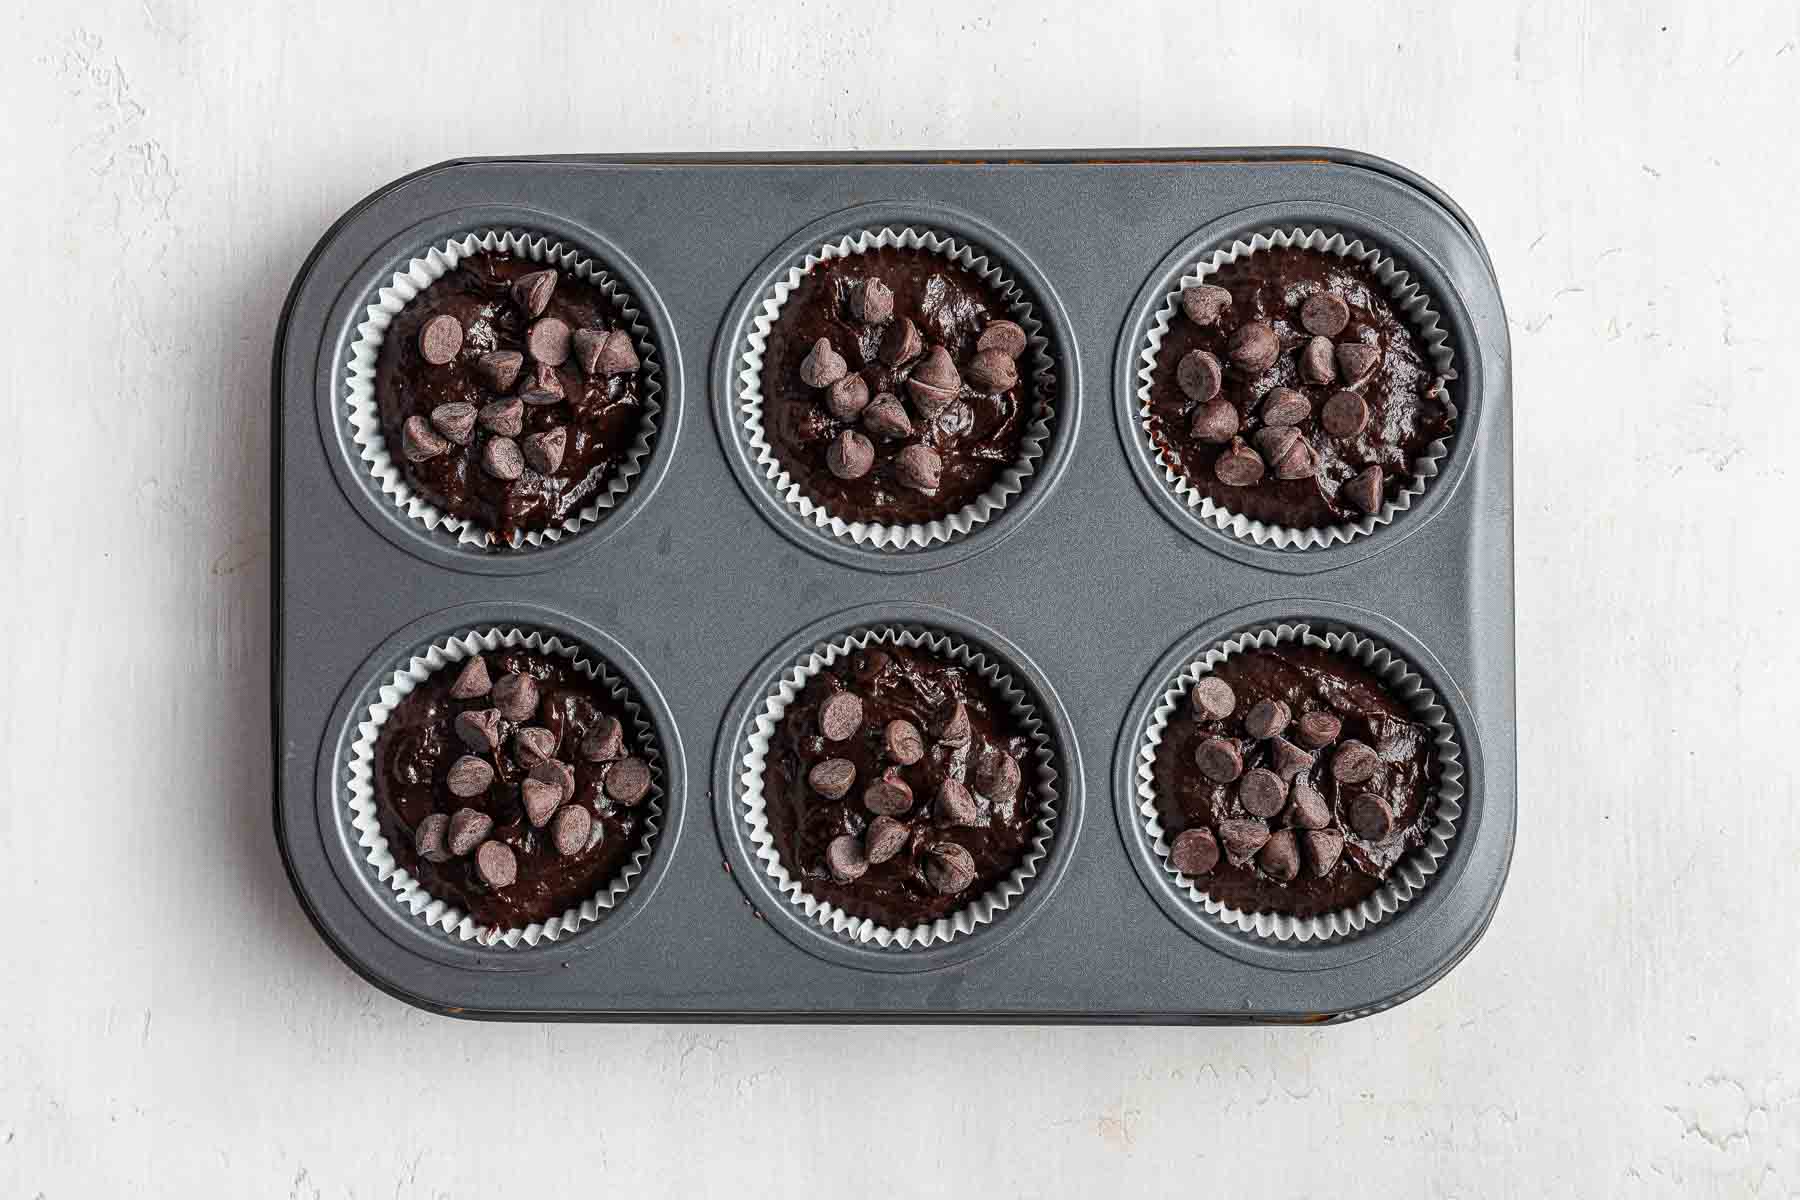 Six portion muffin tray with chocolate muffins about to be baked in oven.